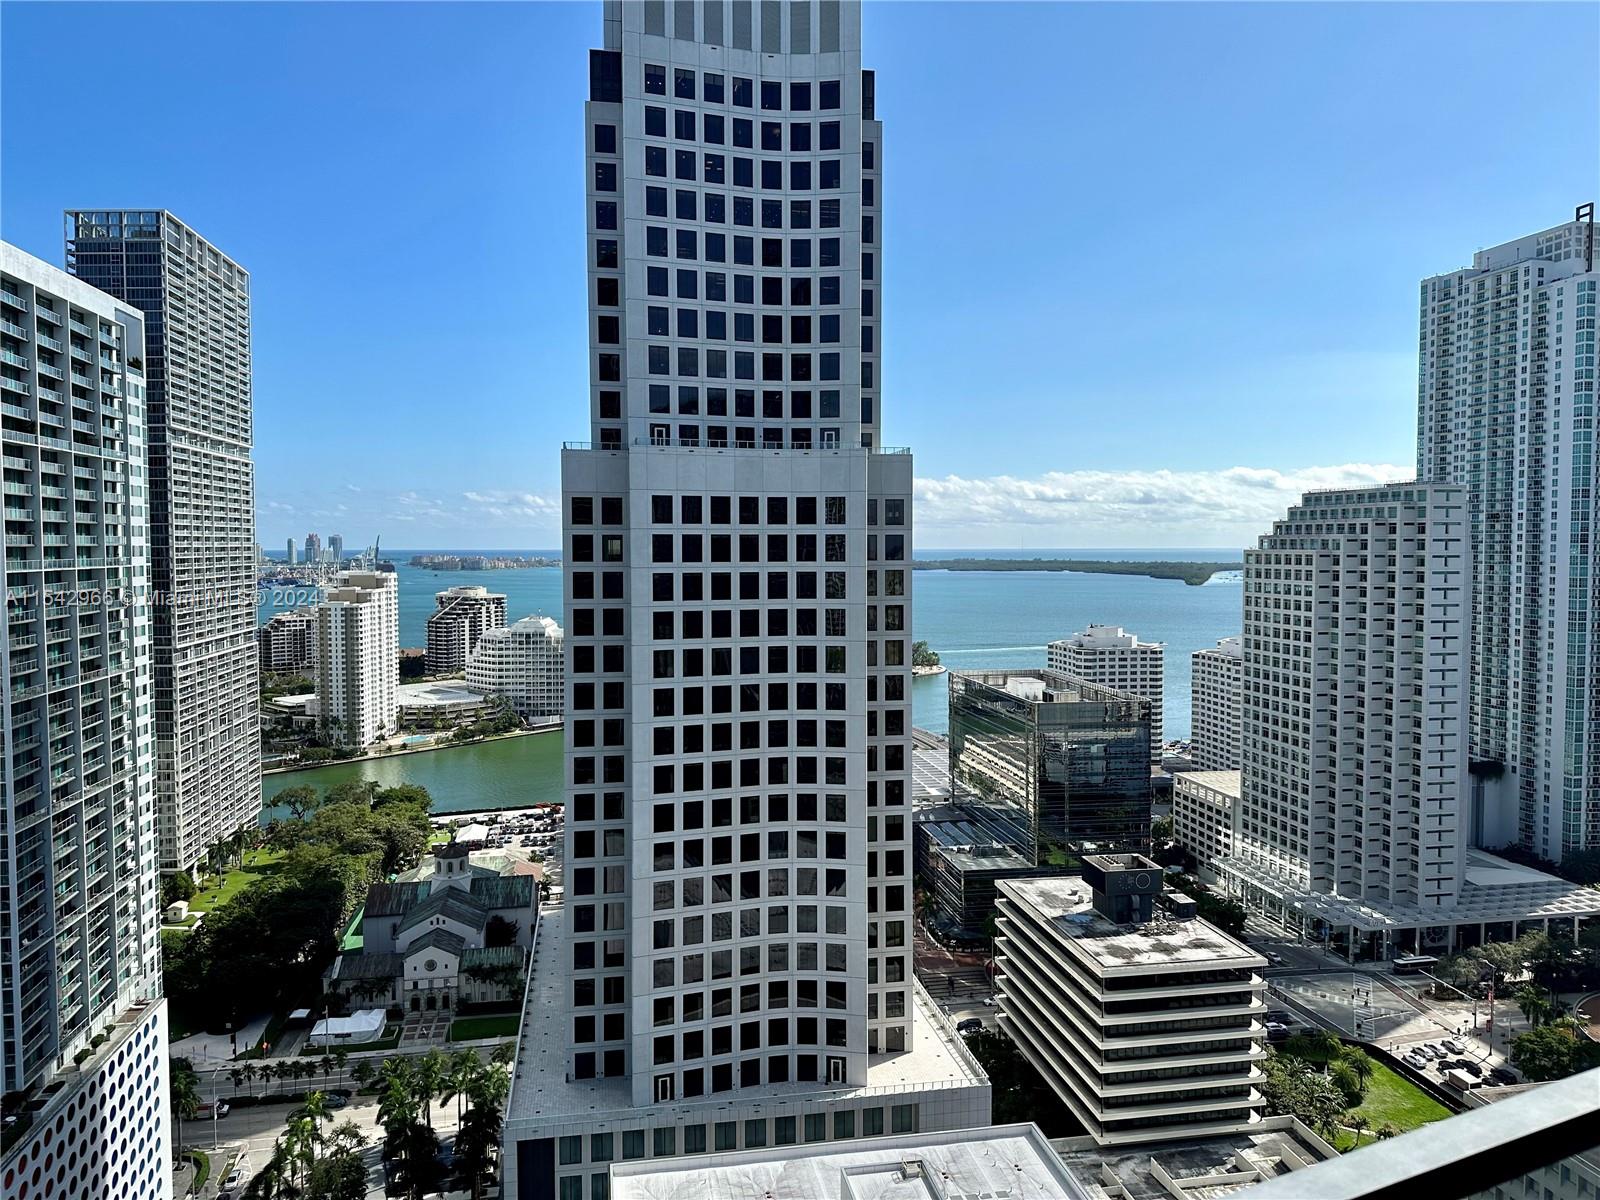 Live in a private enclave in the heart of Brickell City Center!! Beautiful Unit 2 Bedrooms 2 and 1/2 Bathrooms. The highly desired Reach Condo provides an abundance of space to live, entertain, relax, and play. Spacious and bright apartment, one of the best views in the building, amazing partial Intracoastal view. Living, Family, and a stunning Kitchen. High-end Appliances. Striking Bathrooms, closets, and floors, also High impact windows. Bright and Modern. By far, one of the best units at the Condo!!! The building has many amenities including a Gym, Fitness center, Pool, Kids Playground, and more. This home is sure to be at the top of your list, what other reasons will make you fall in love with this magnificent unit? Schedule your private showing today.